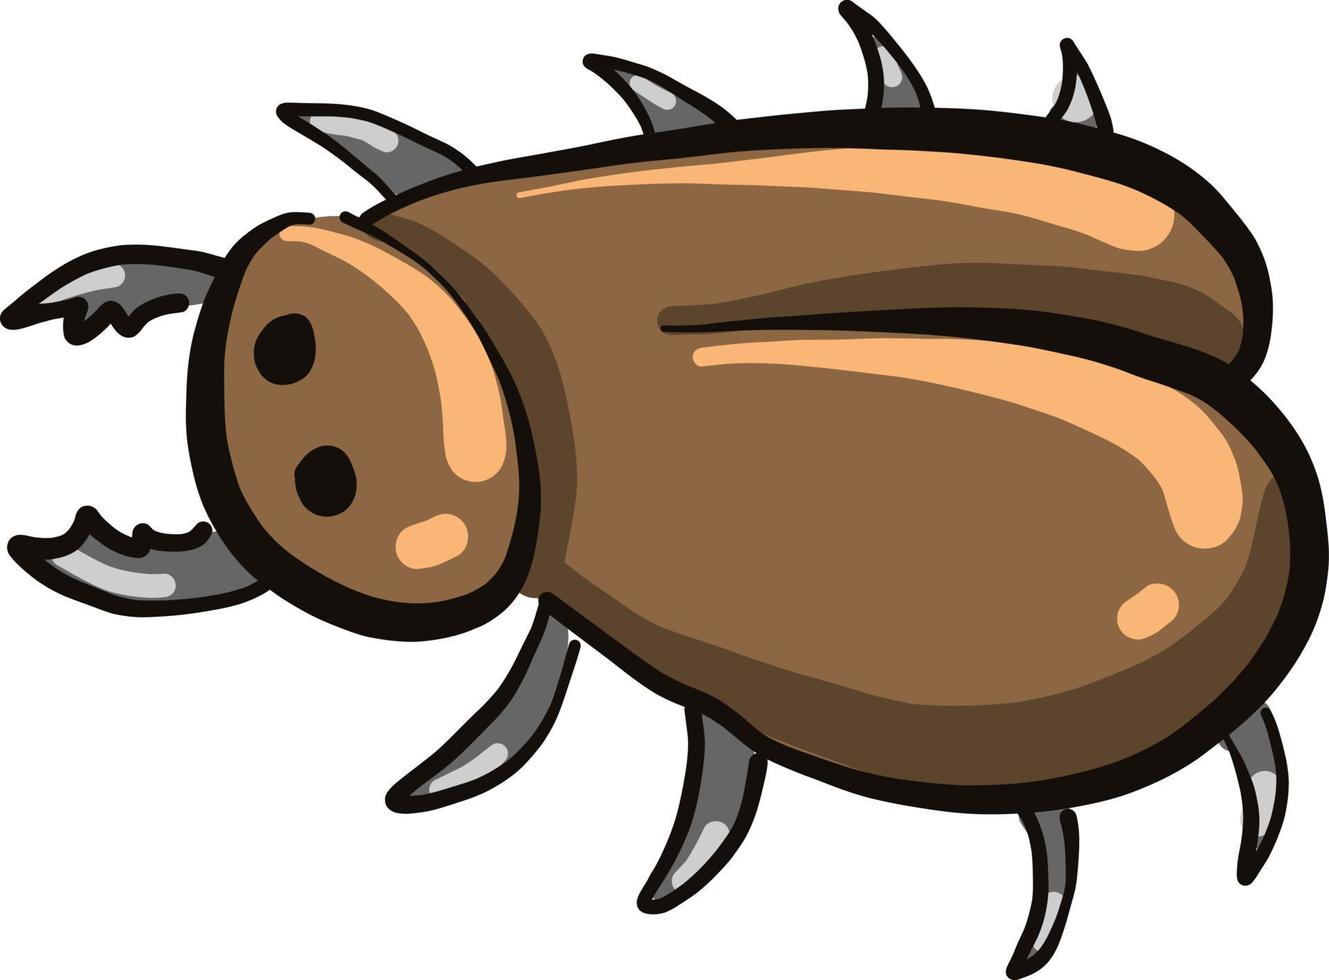 Small cockroach, illustration, vector on a white background.